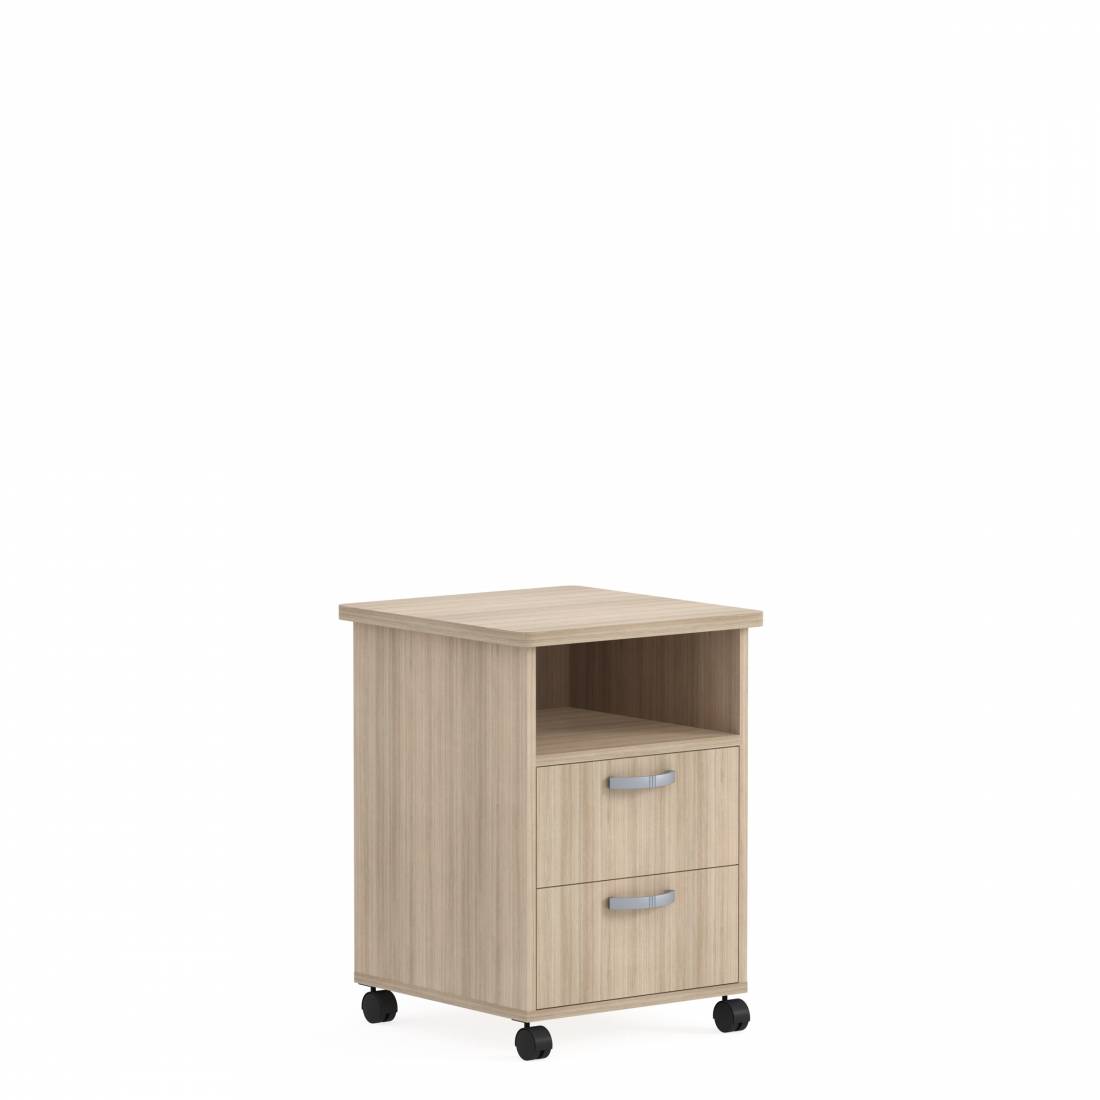 Bedside Cabinet, Casters, Two Drawers, Fixed Shelf